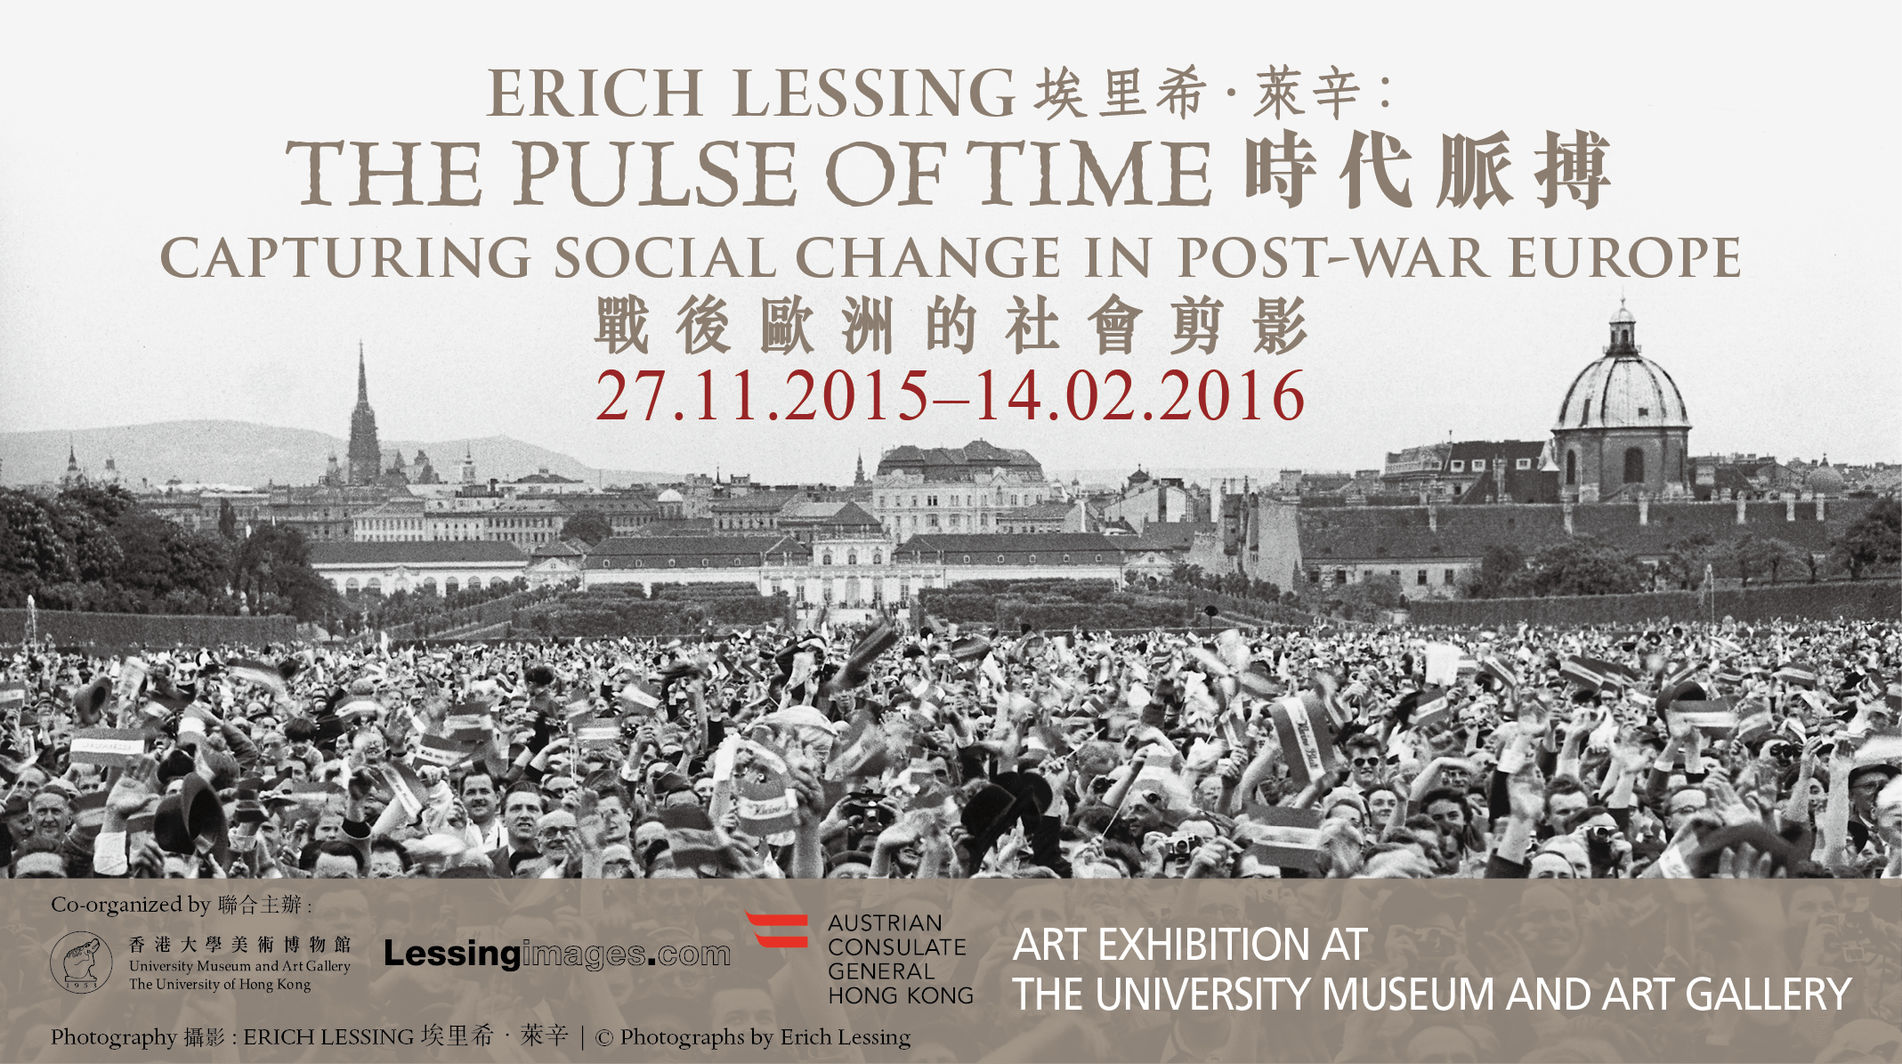 Erich Lessing: The Pulse of Time-Capturing Social Change in Post-war Europe 埃里希・萊辛：時代脈搏－戰後歐洲的社會剪影